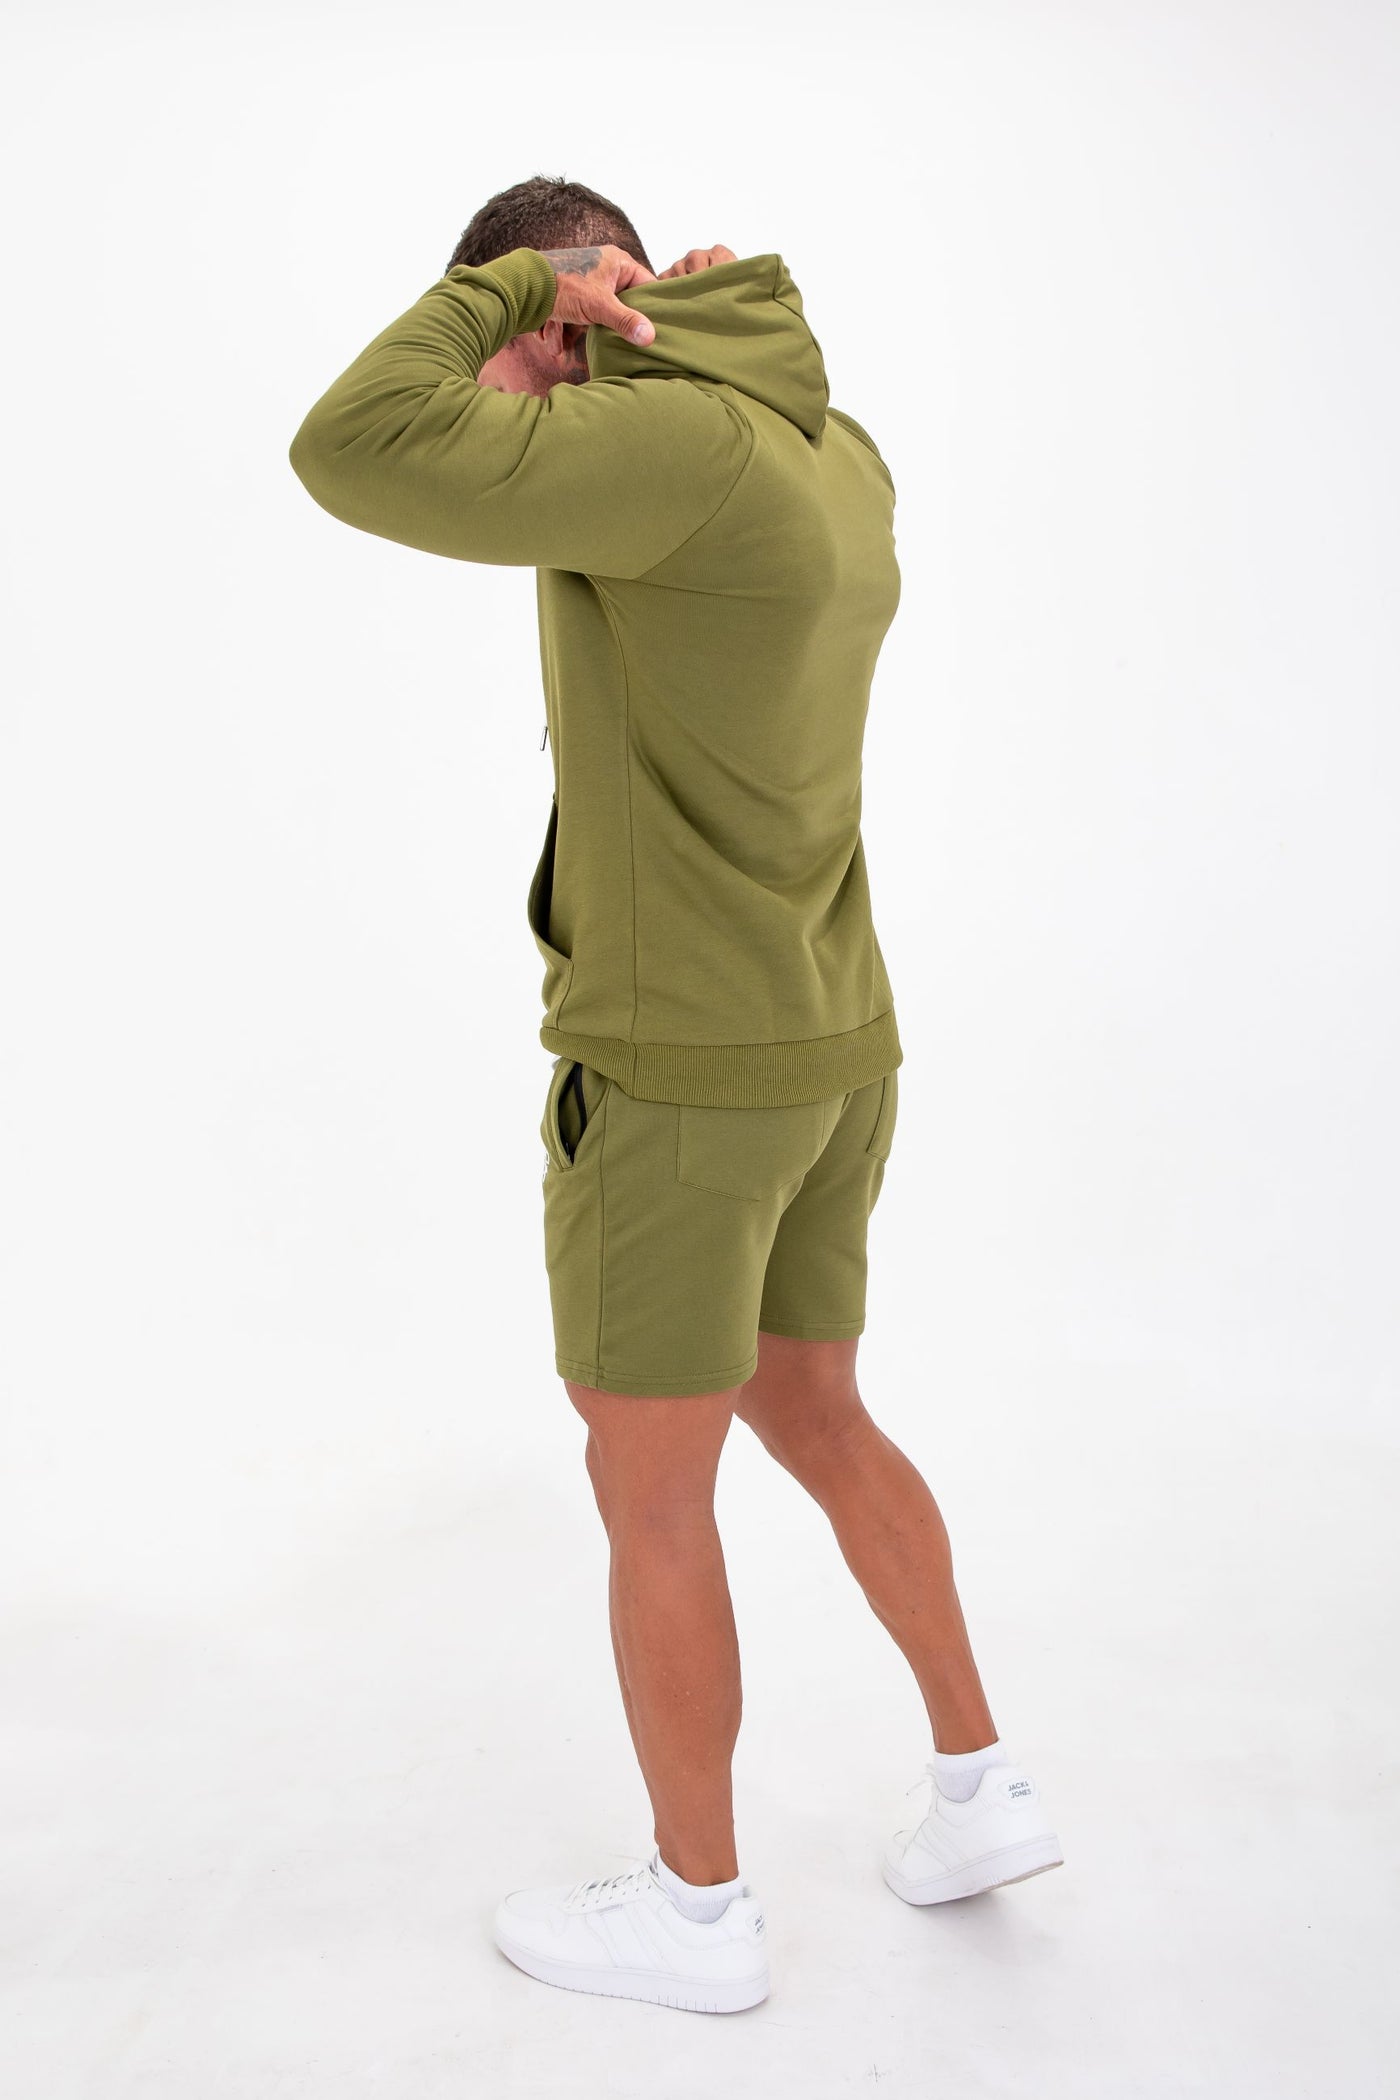 Classic Lightweight French Terry Hoodie - Olive Green